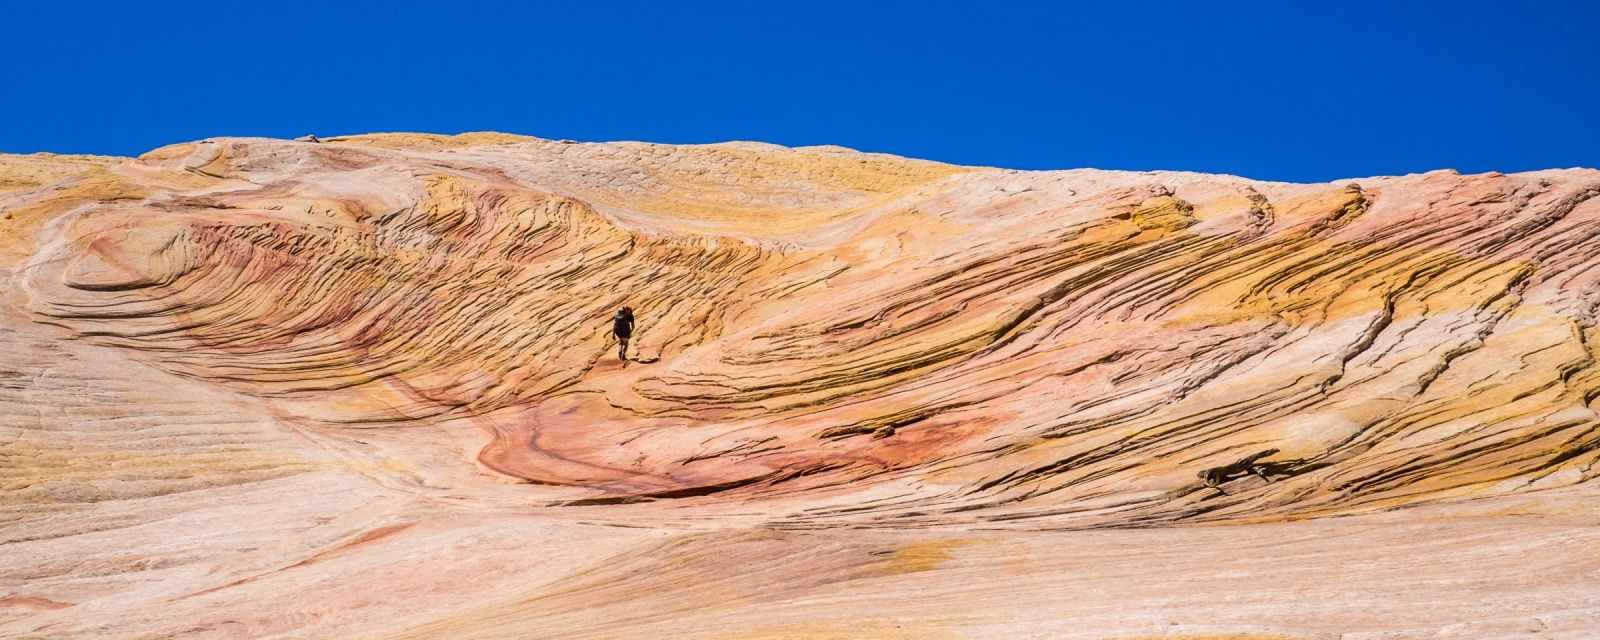 A hiker getting to the top of Yellow Rock